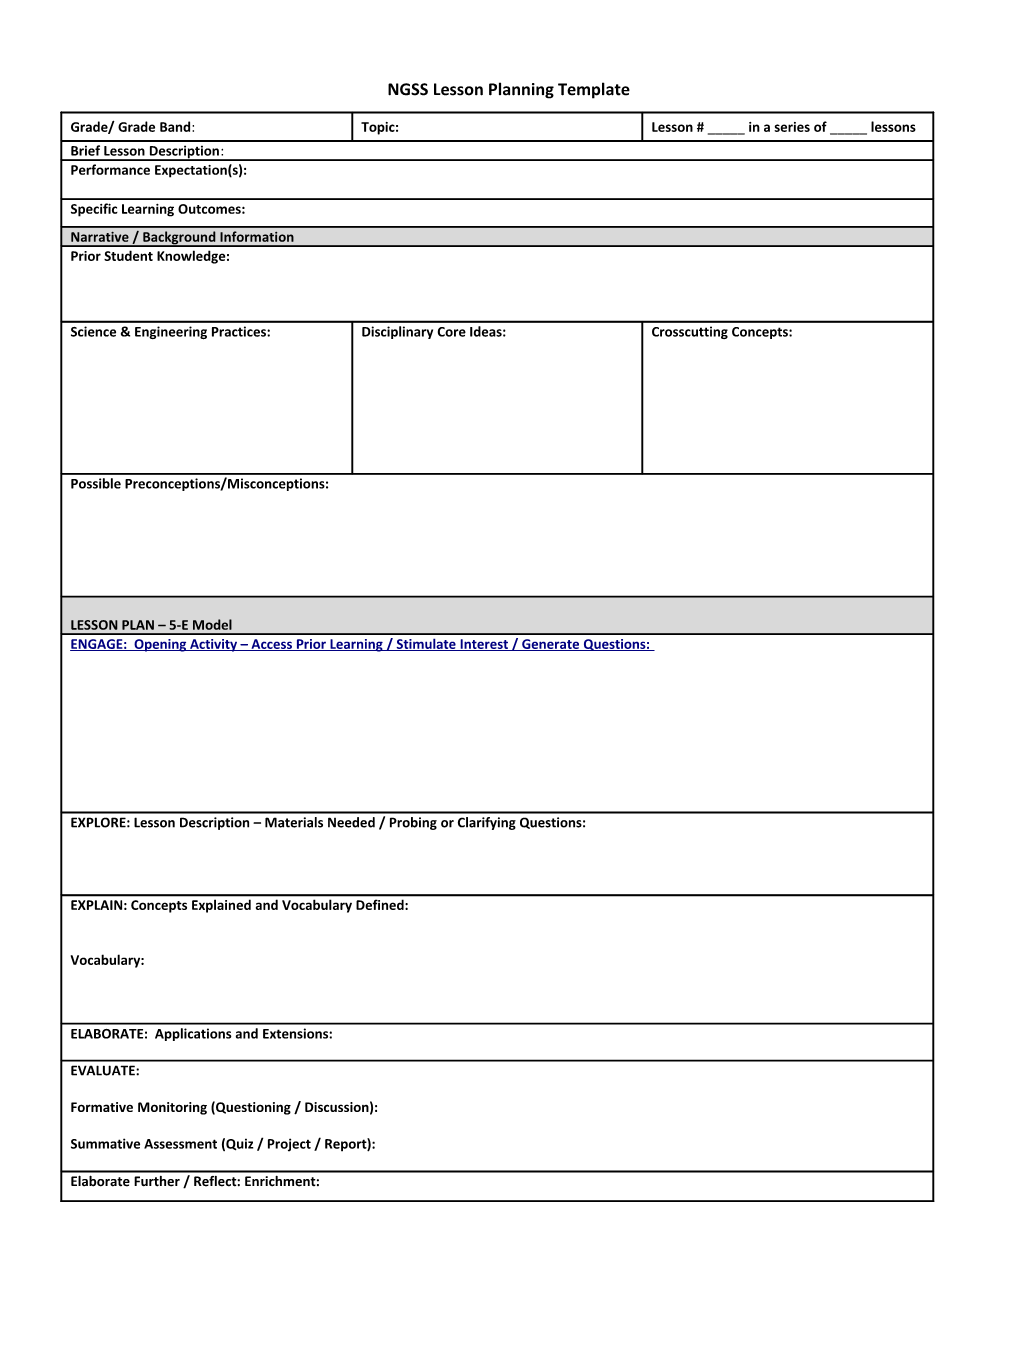 NGSS Lesson Planning Template